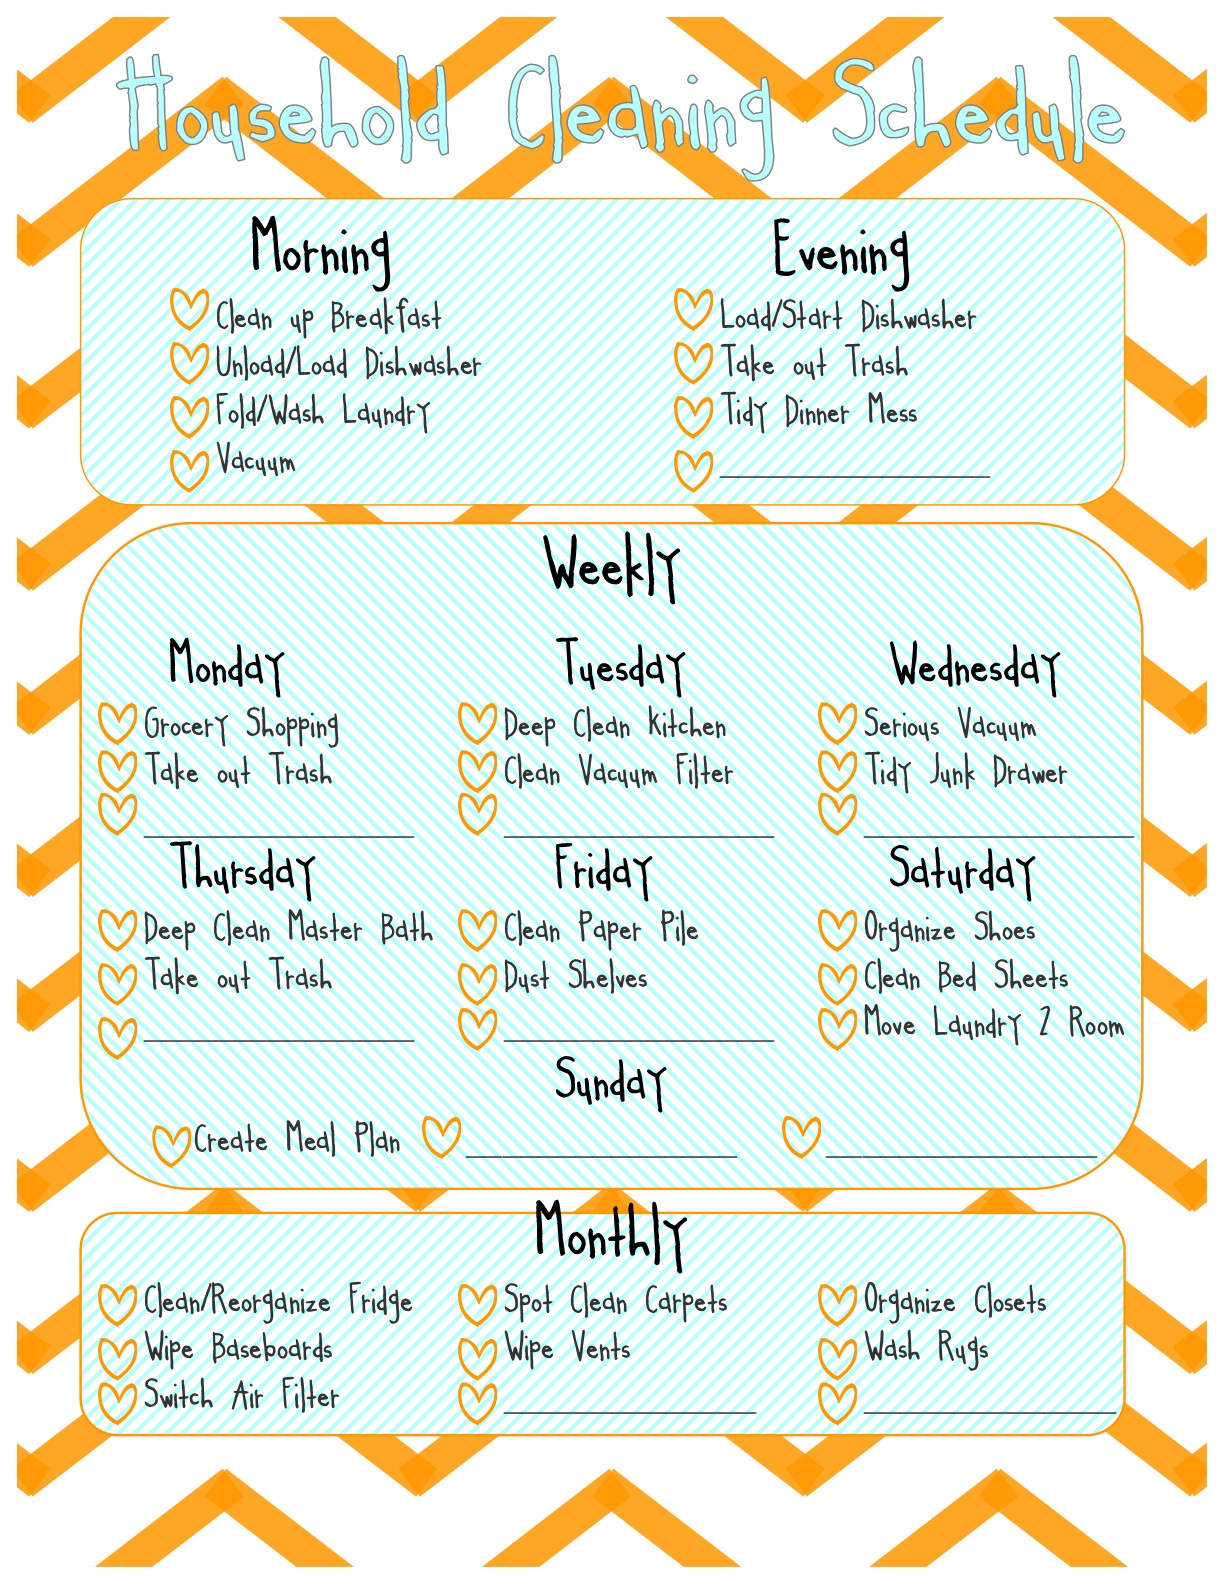 sherbert-cafe-printable-home-cleaning-schedule